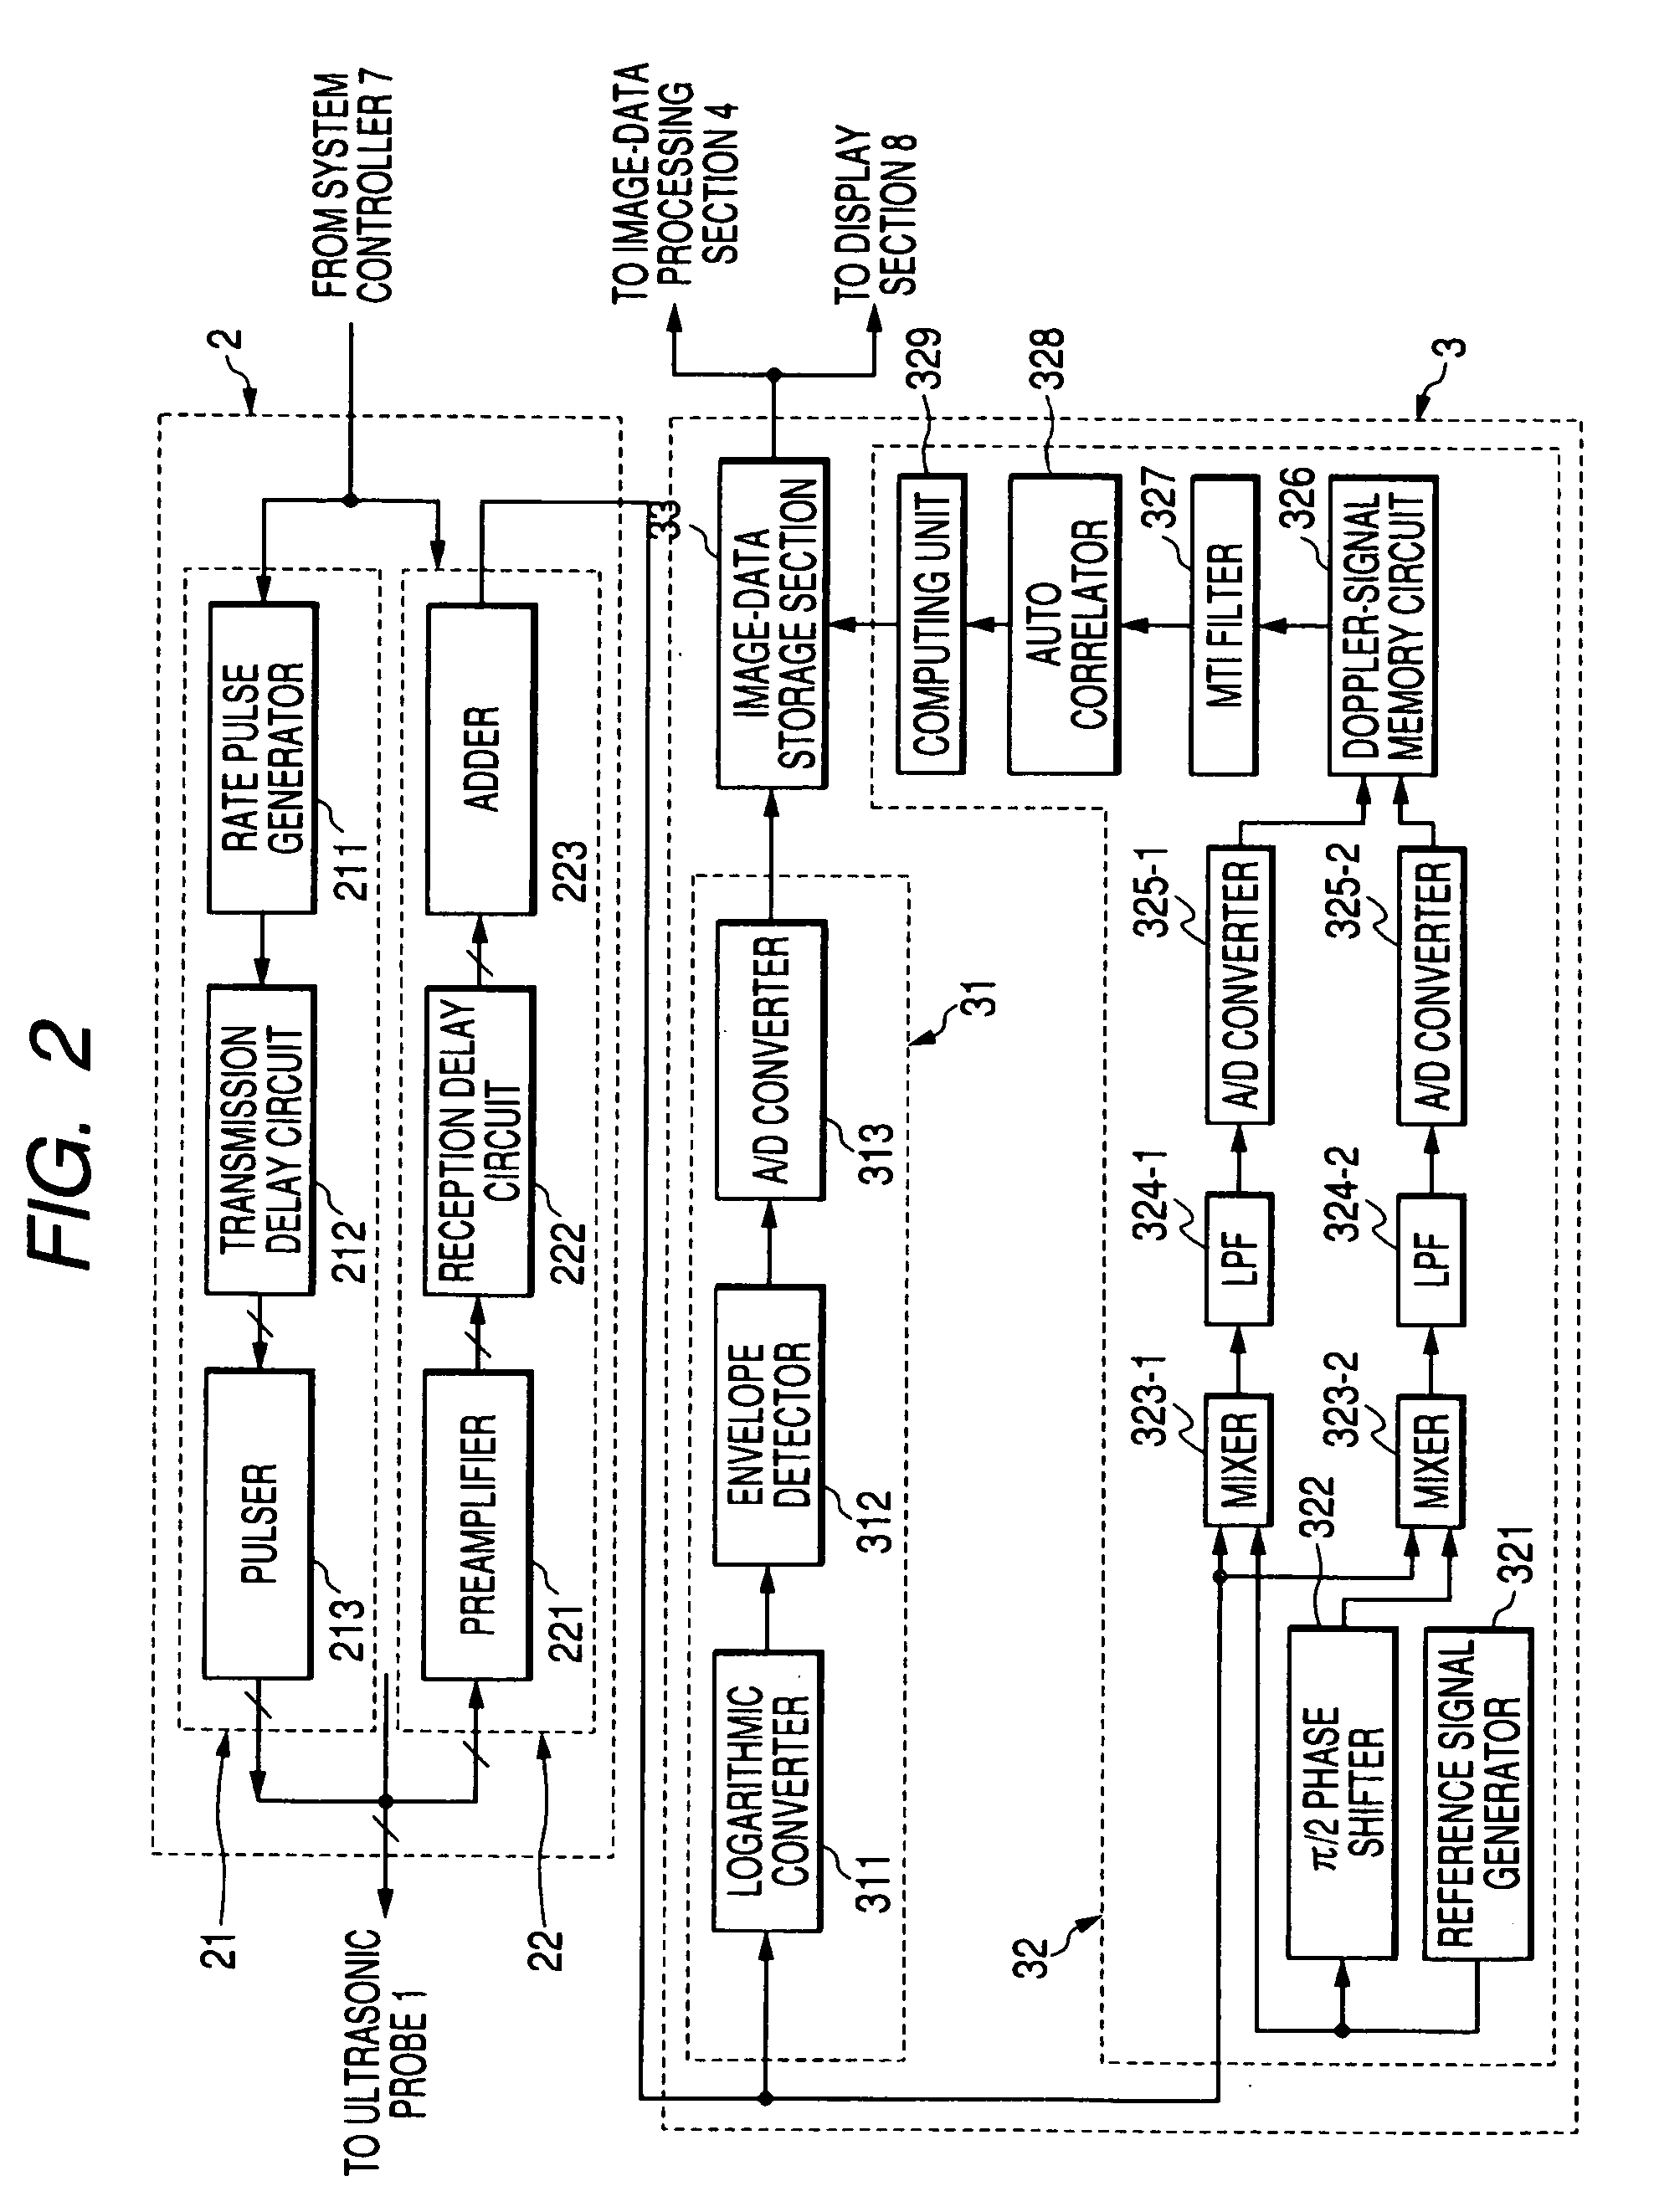 Image data processing method and apparatus for ultrasonic diagnostic apparatus, and image processing apparatus